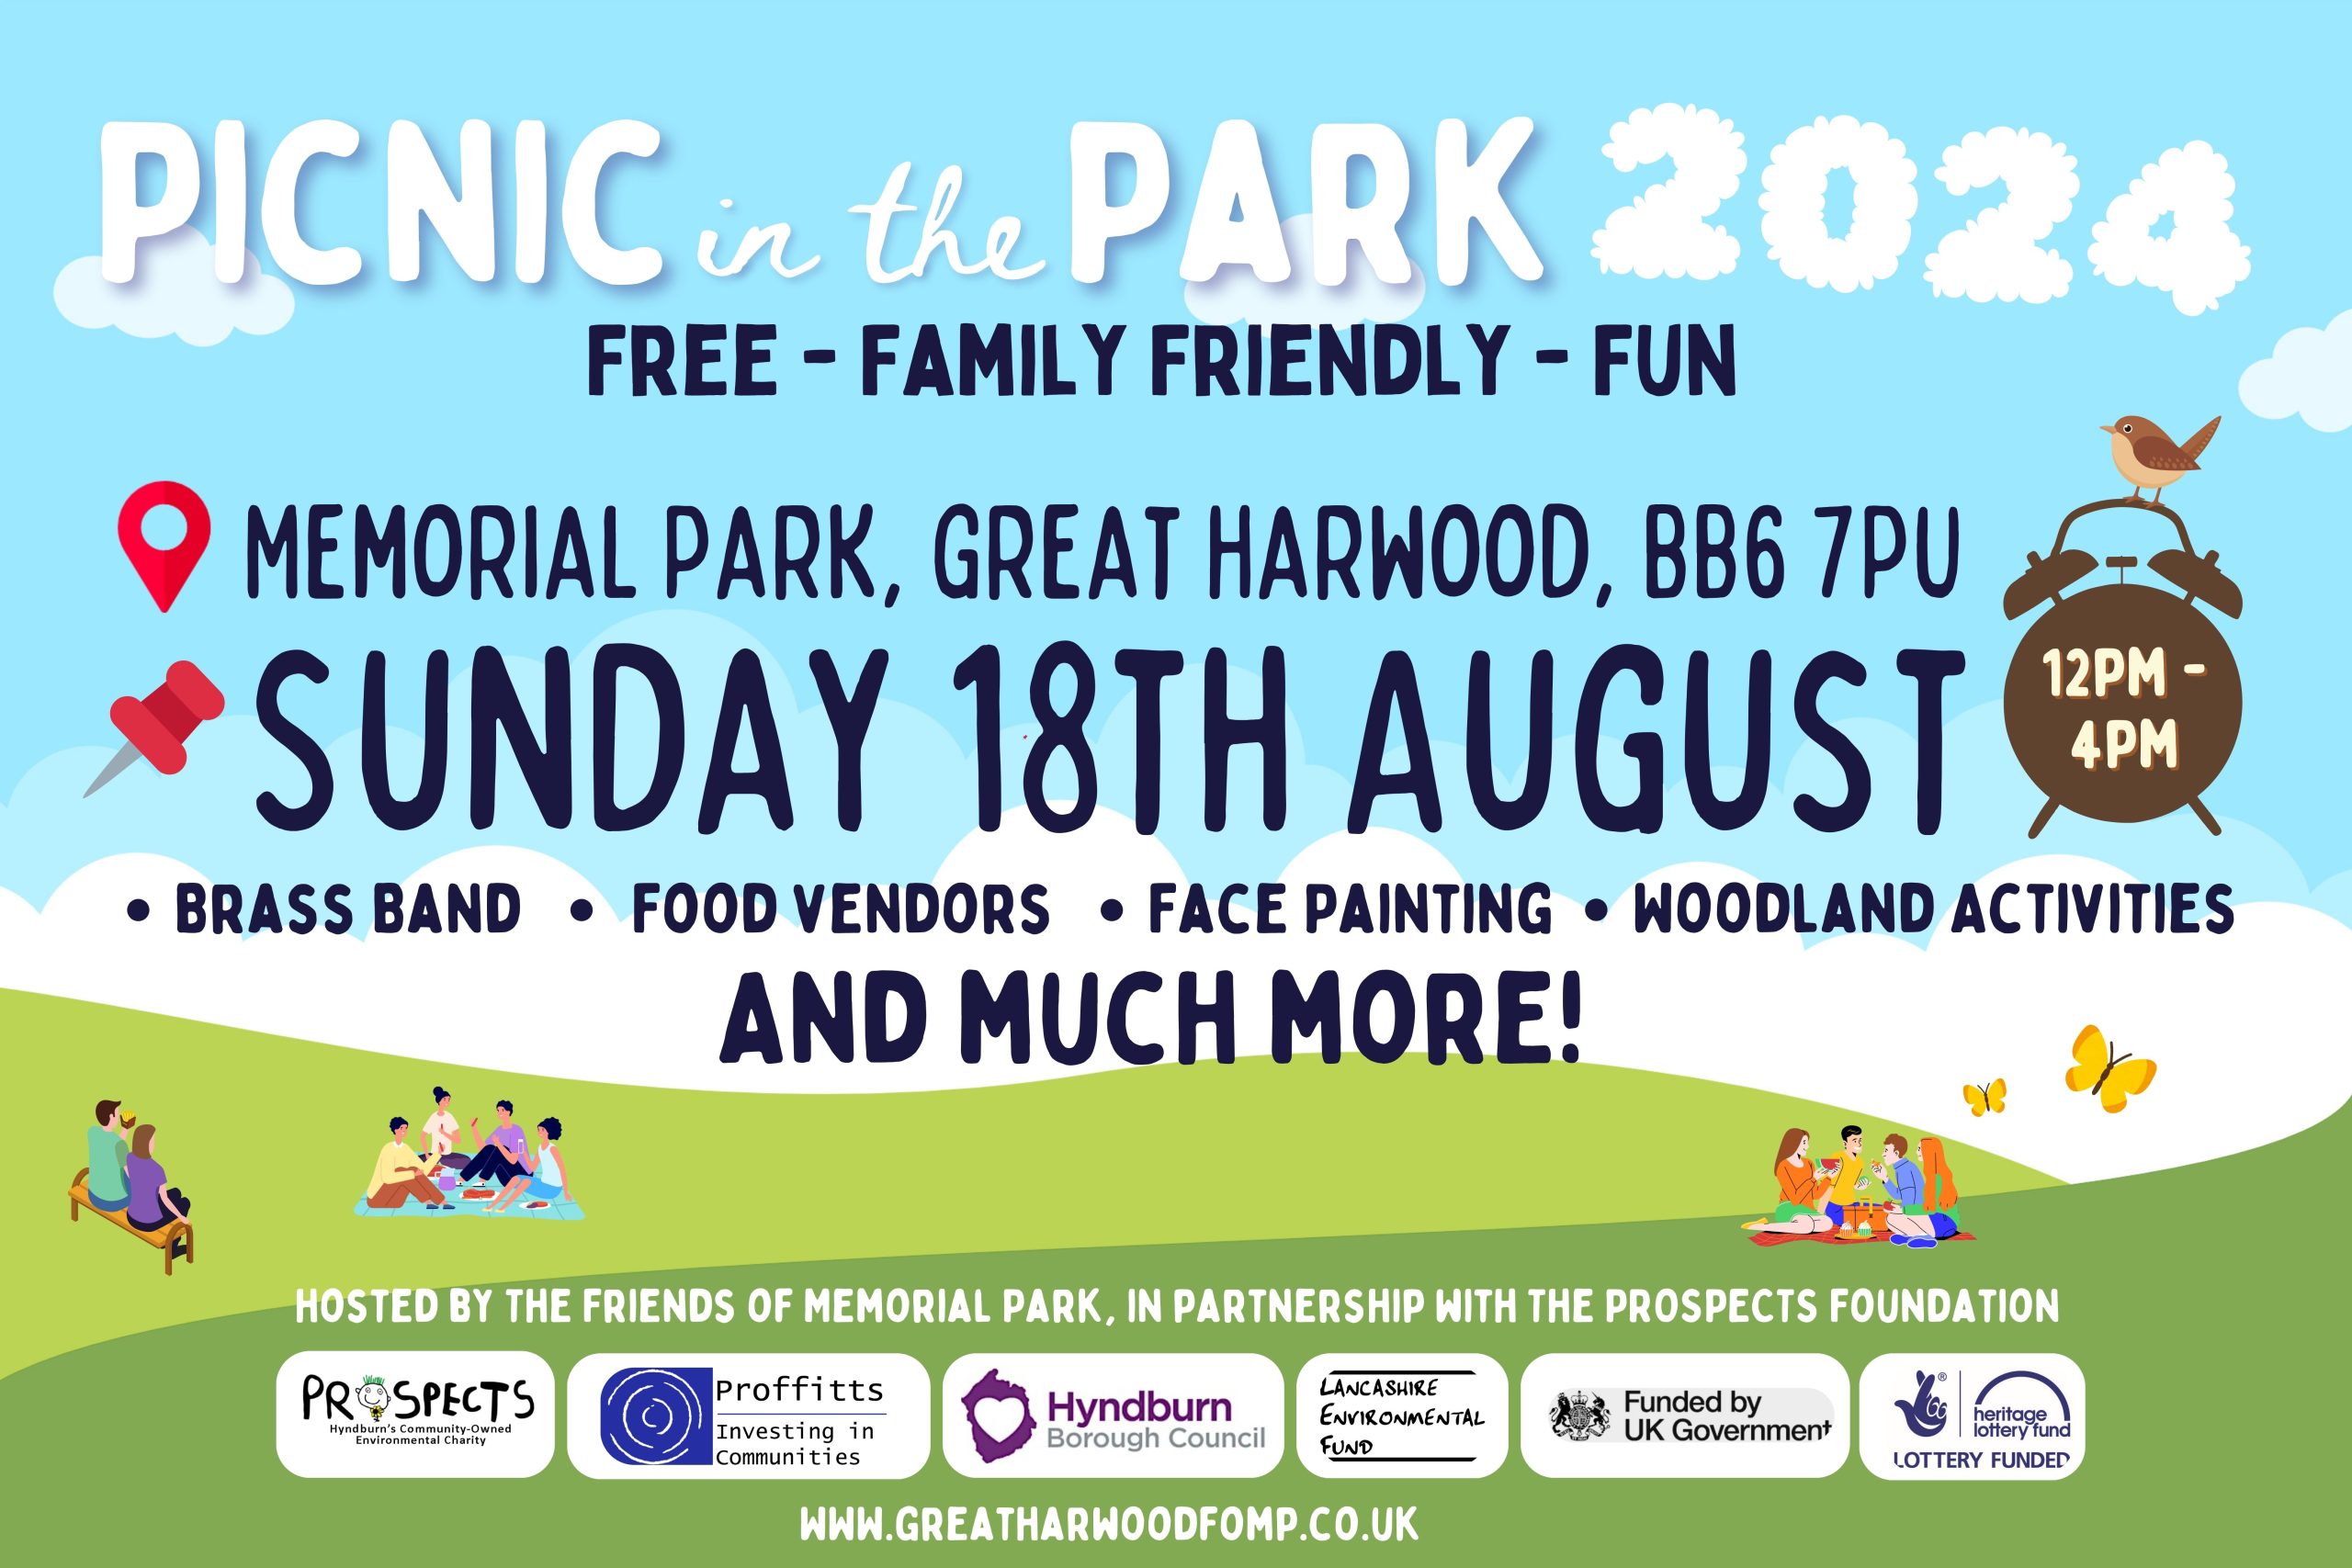 Blue sky background with clouds and green grassy hills at bottom with groups of people sat atop. White and black text detailing picnic in the park event at Memorial park. Partner logos along bottom.